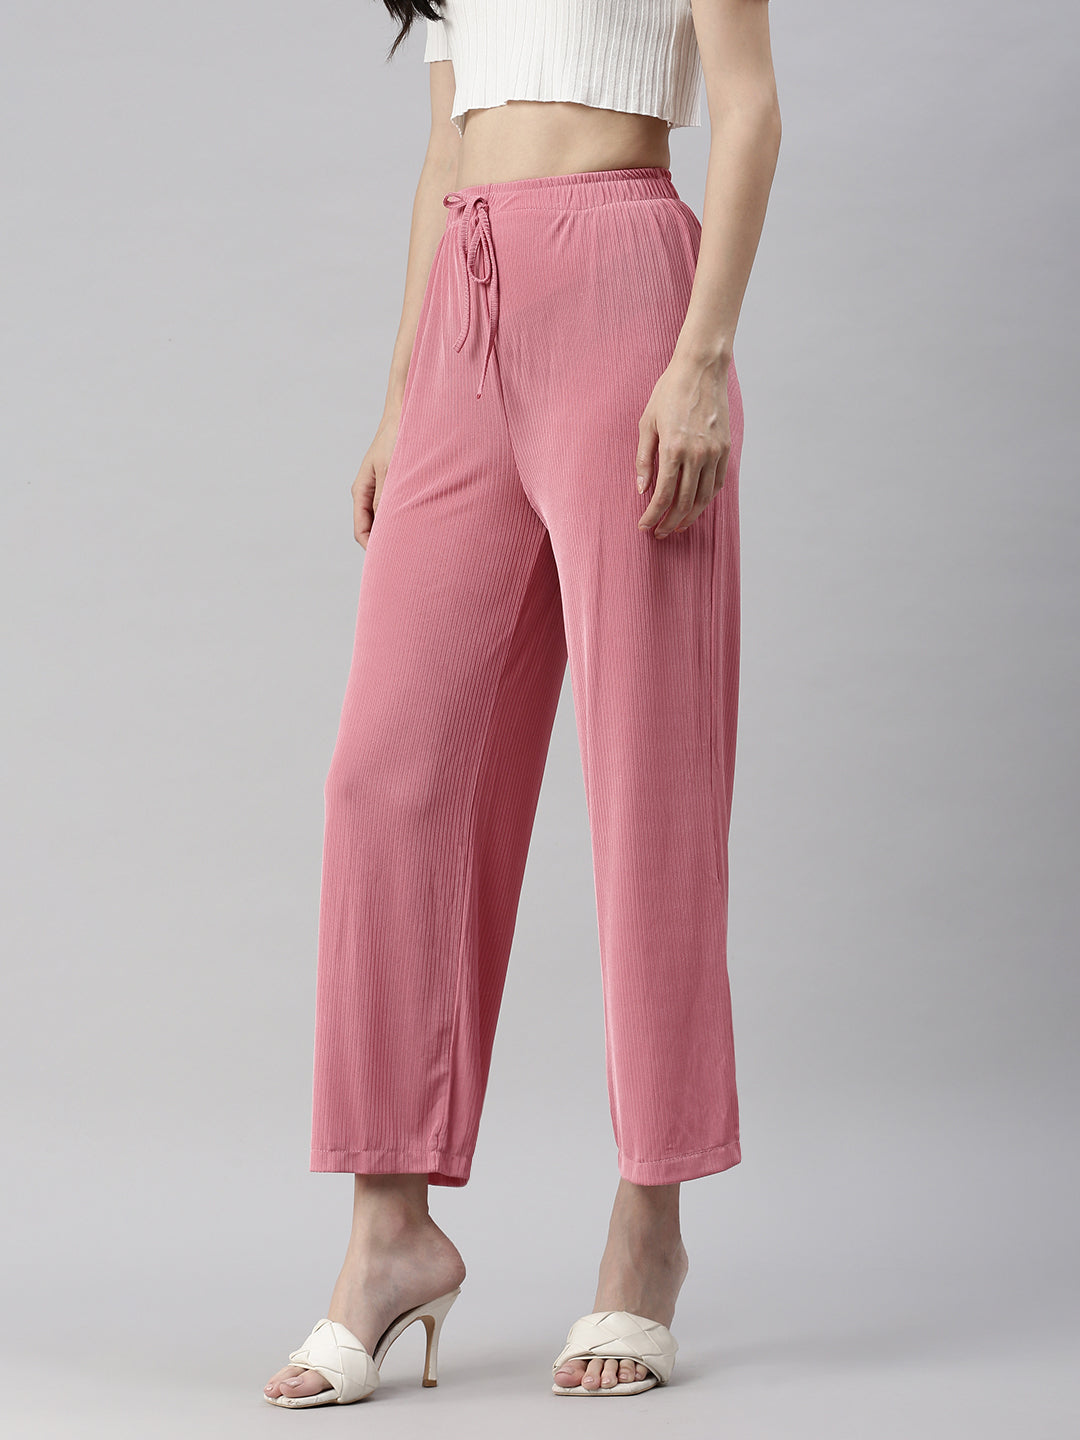 Women's Pink Solid Track Pant